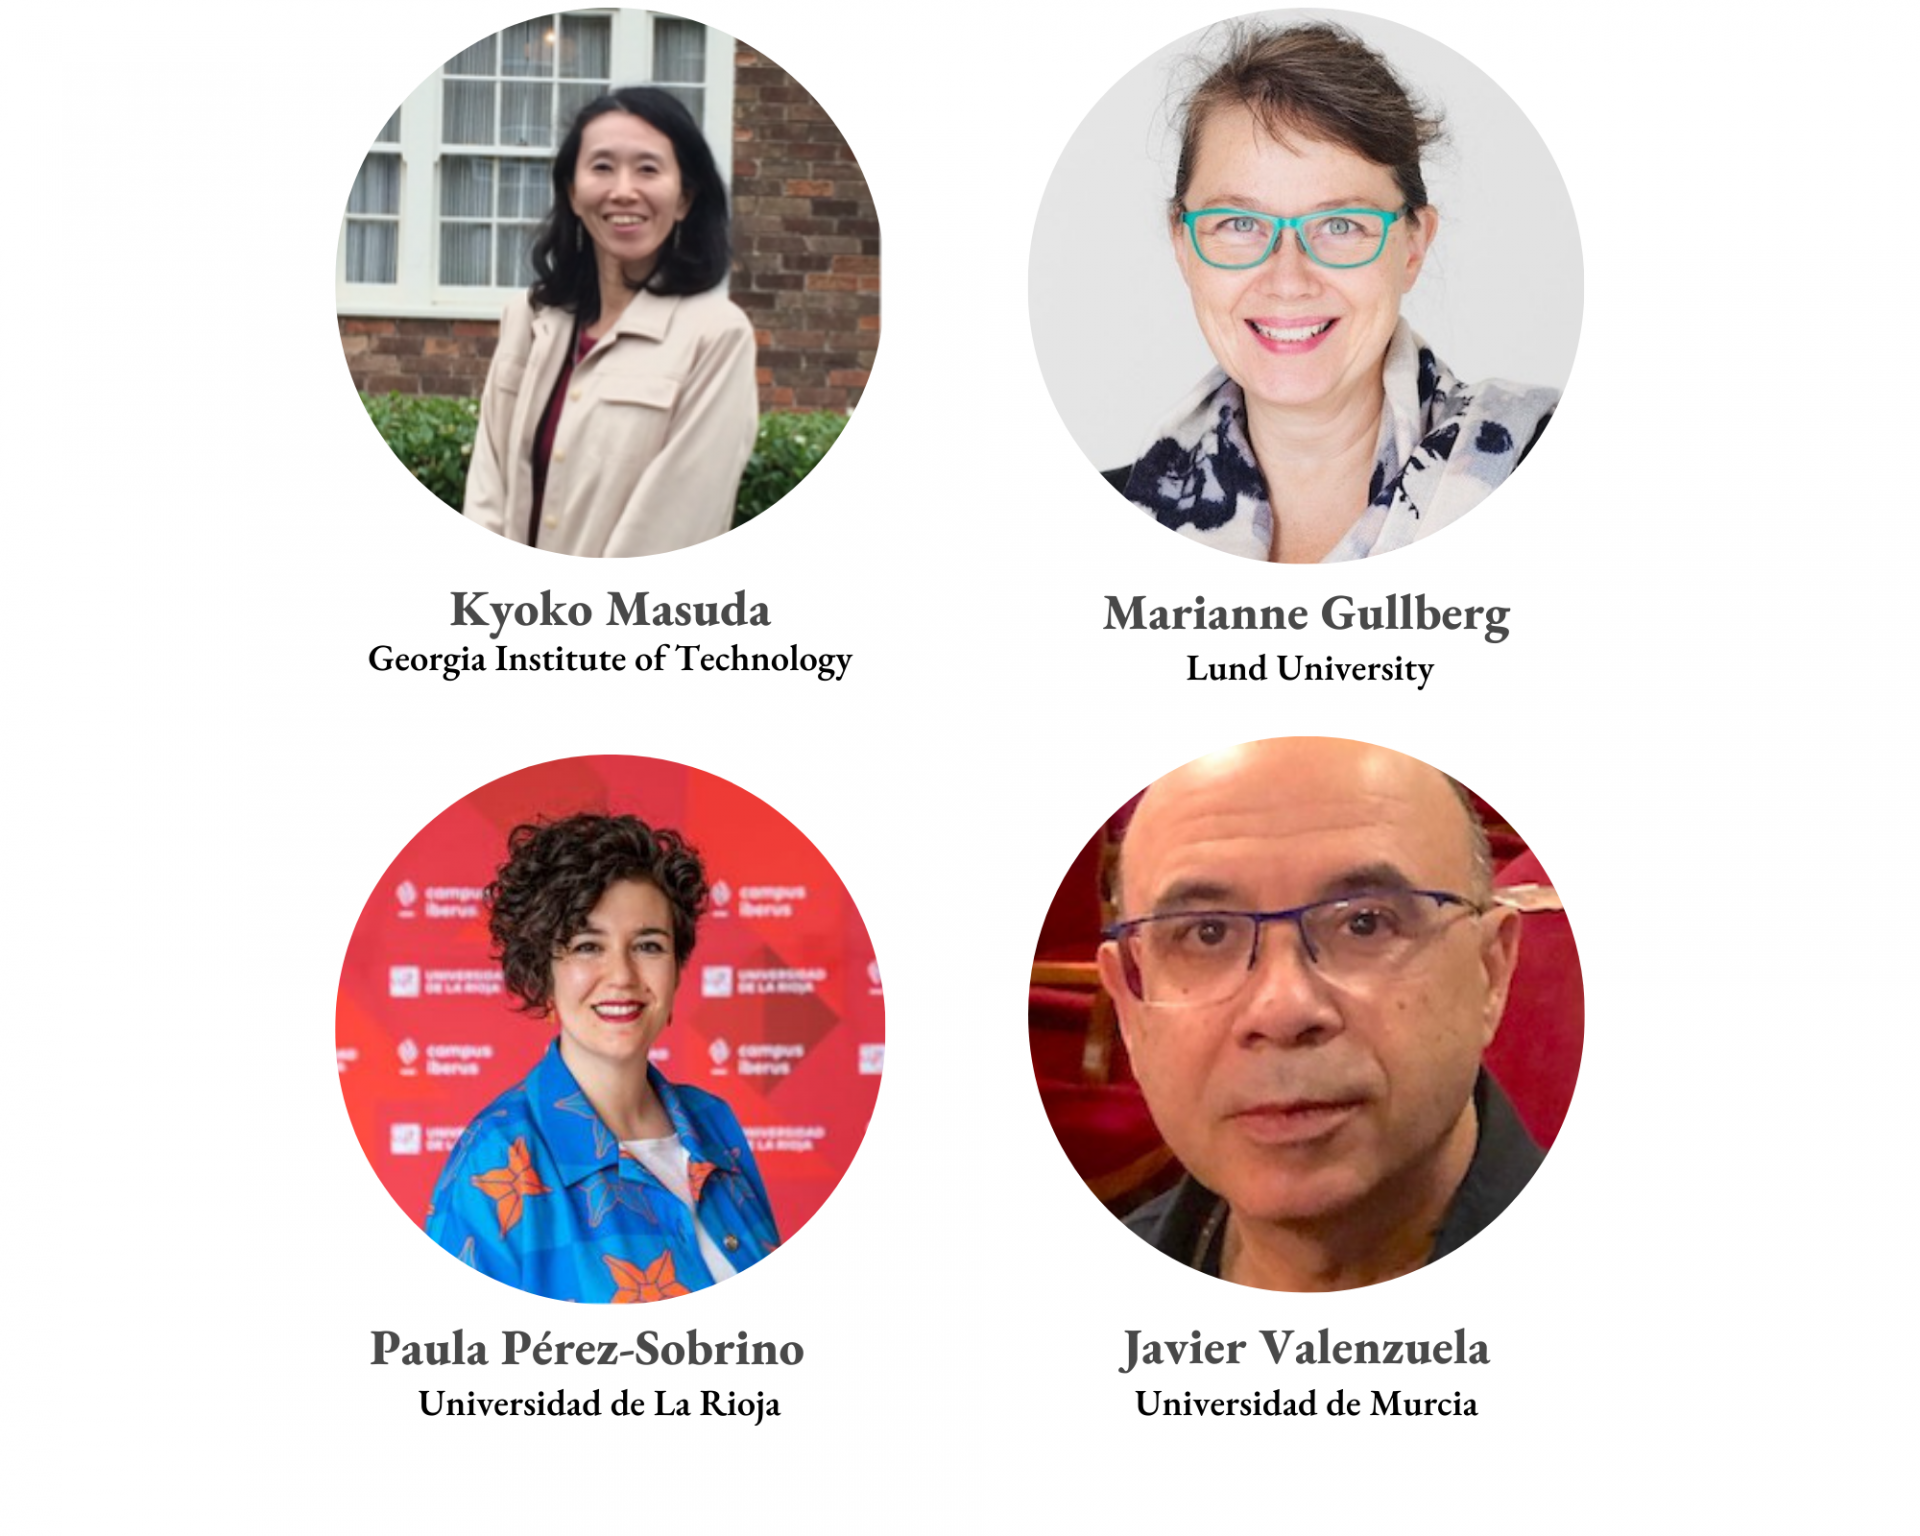 Plenary speakers: names, affiliations and photos